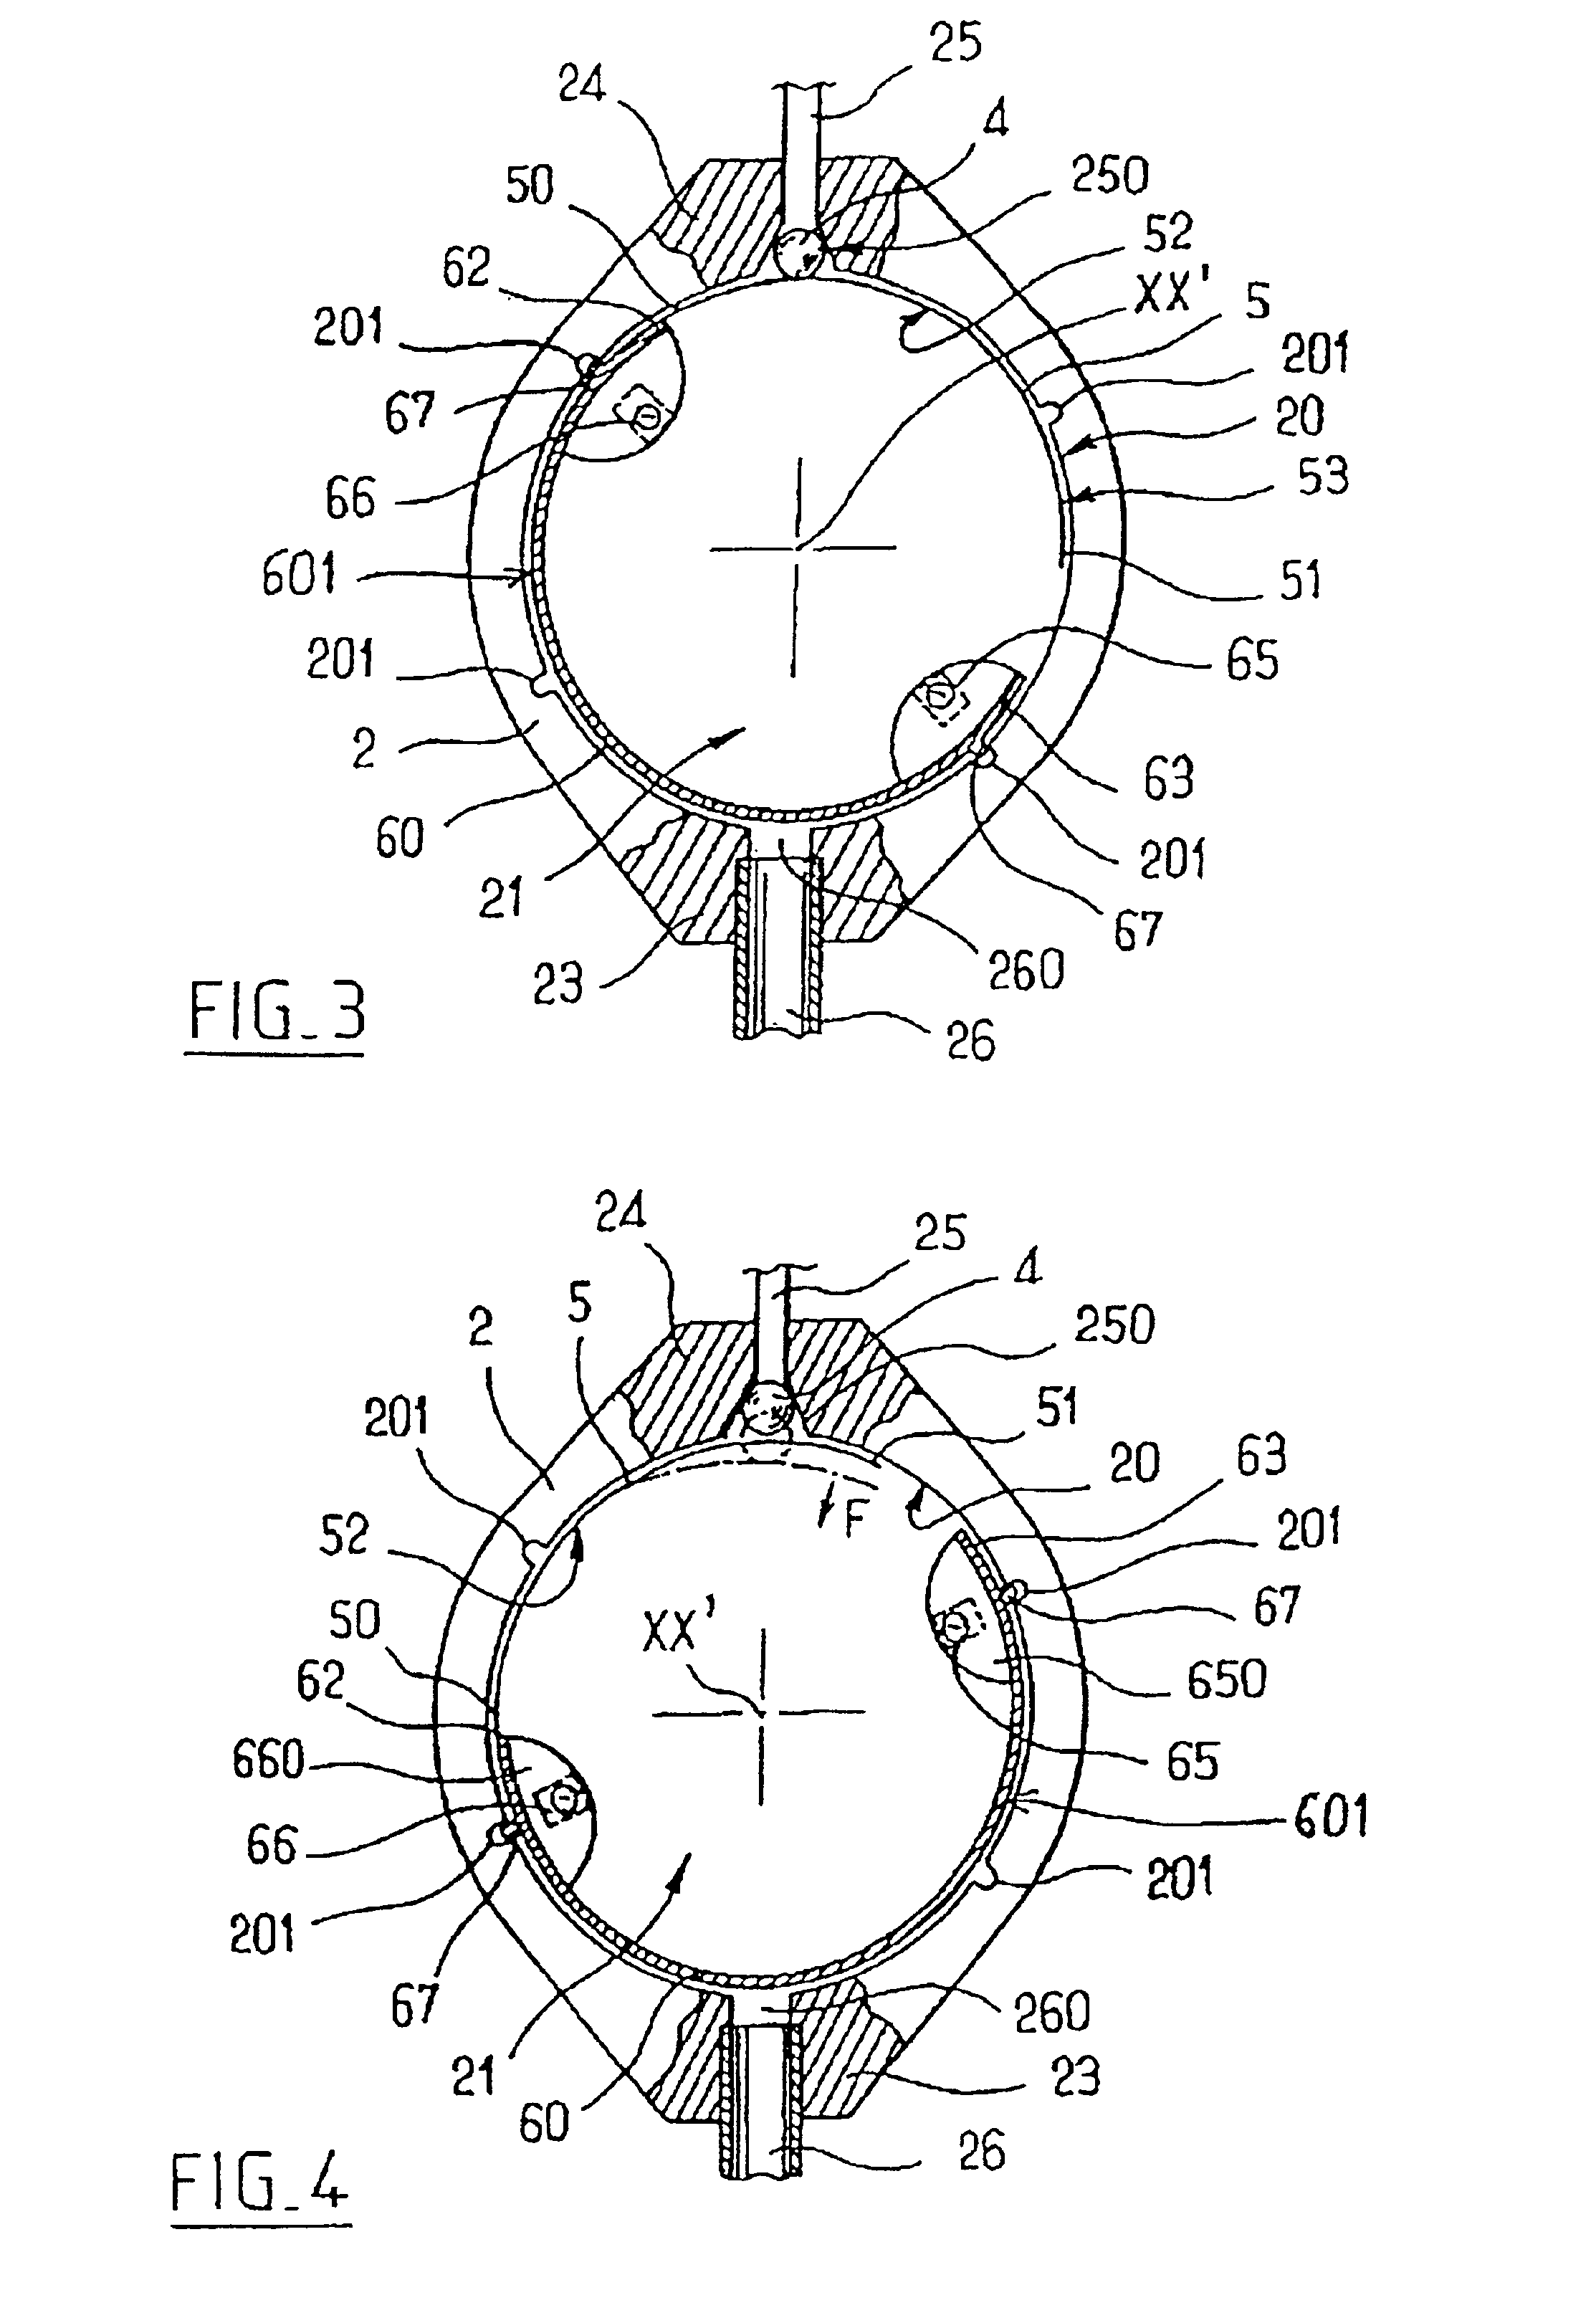 Implantable subcutaneous valve for the treatment of hydrocephalus, and adjusting devices therefor